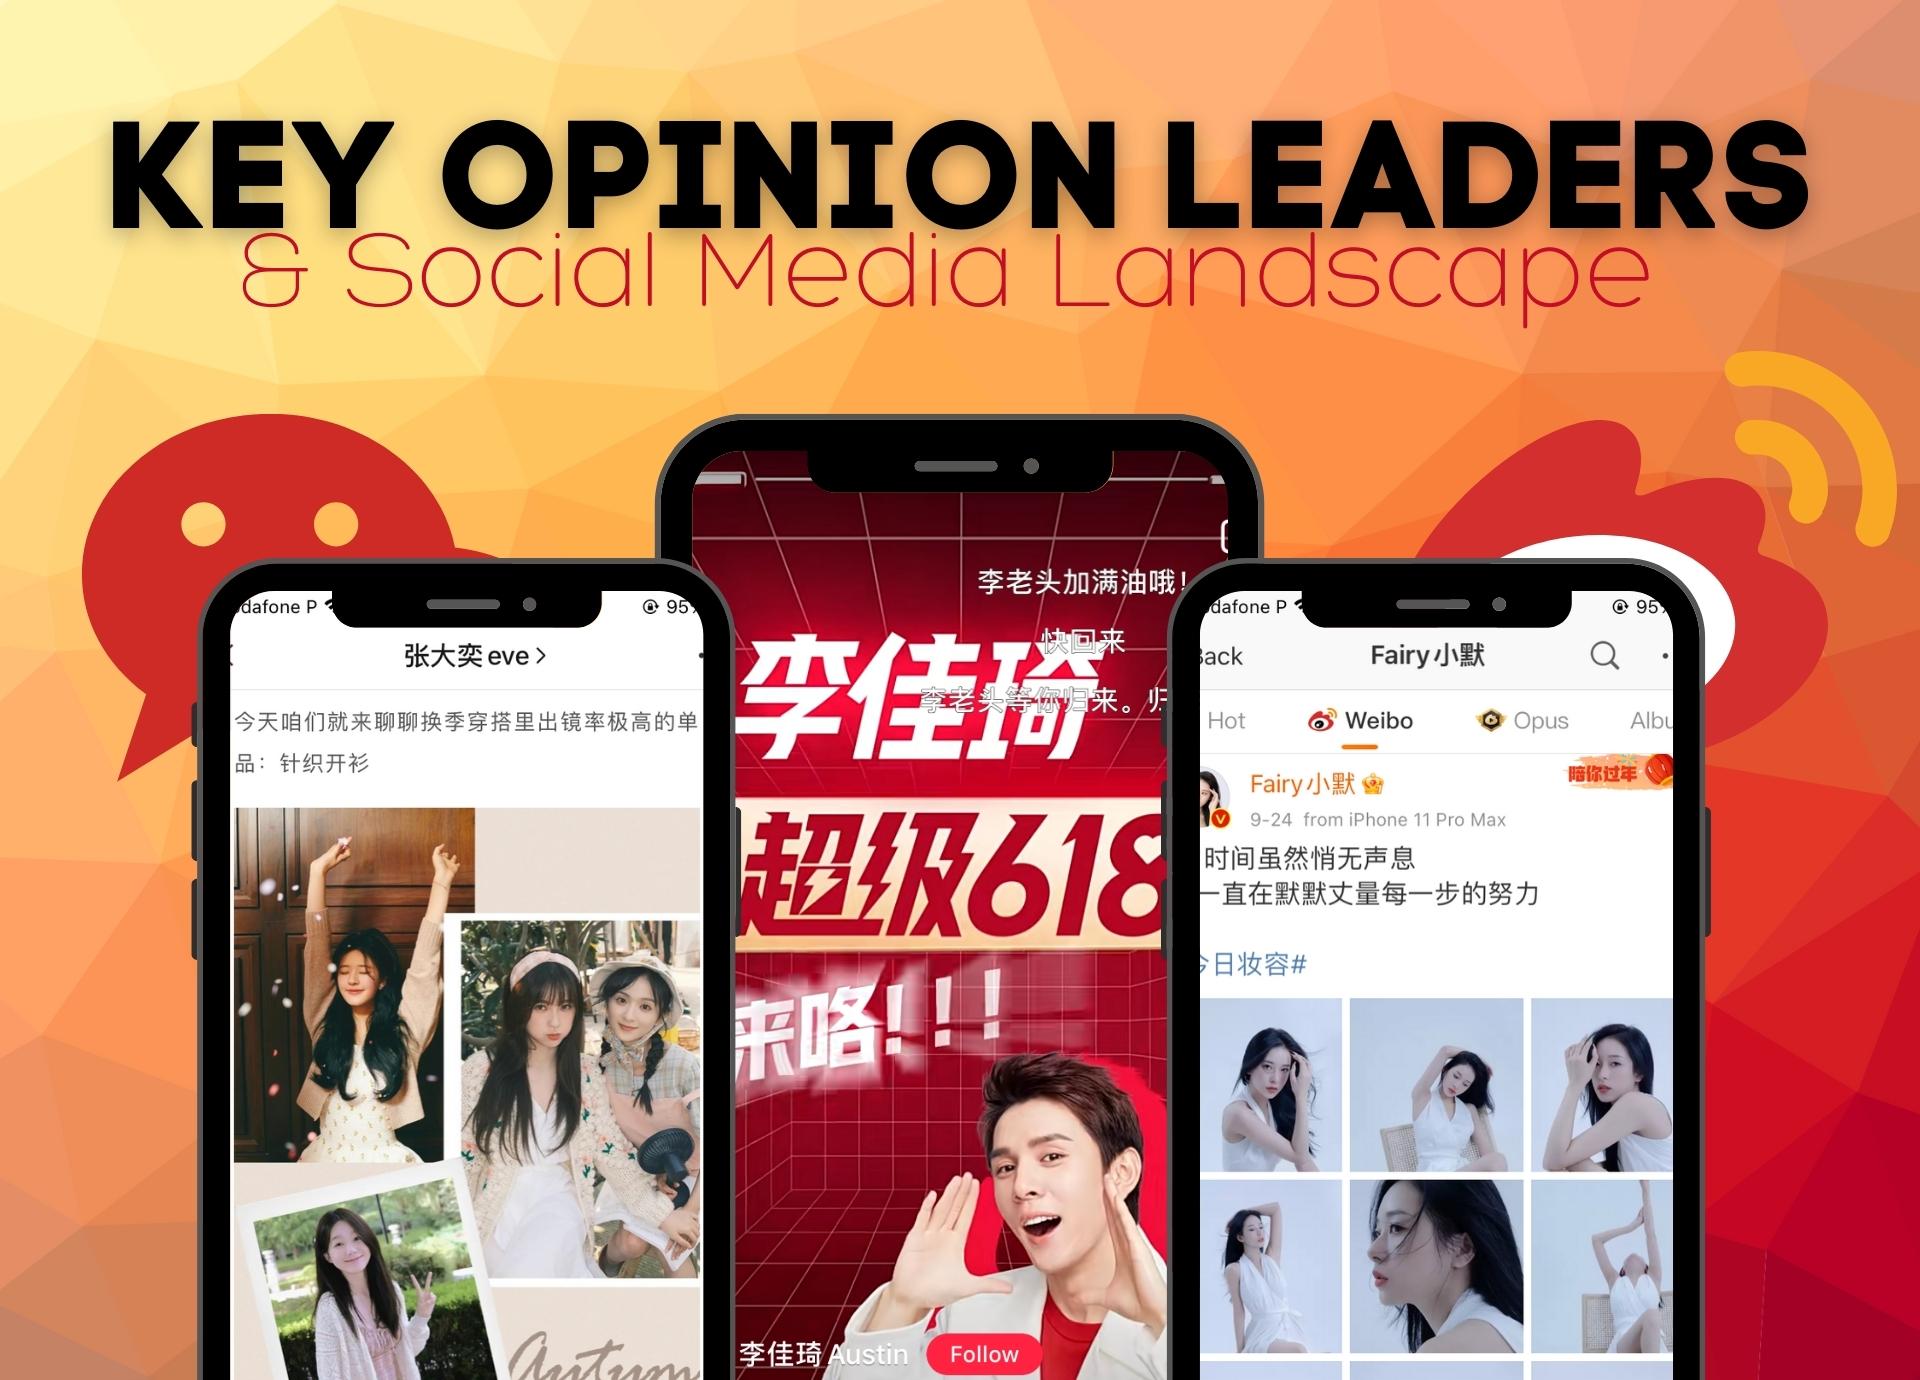 Key opinion leaders in China